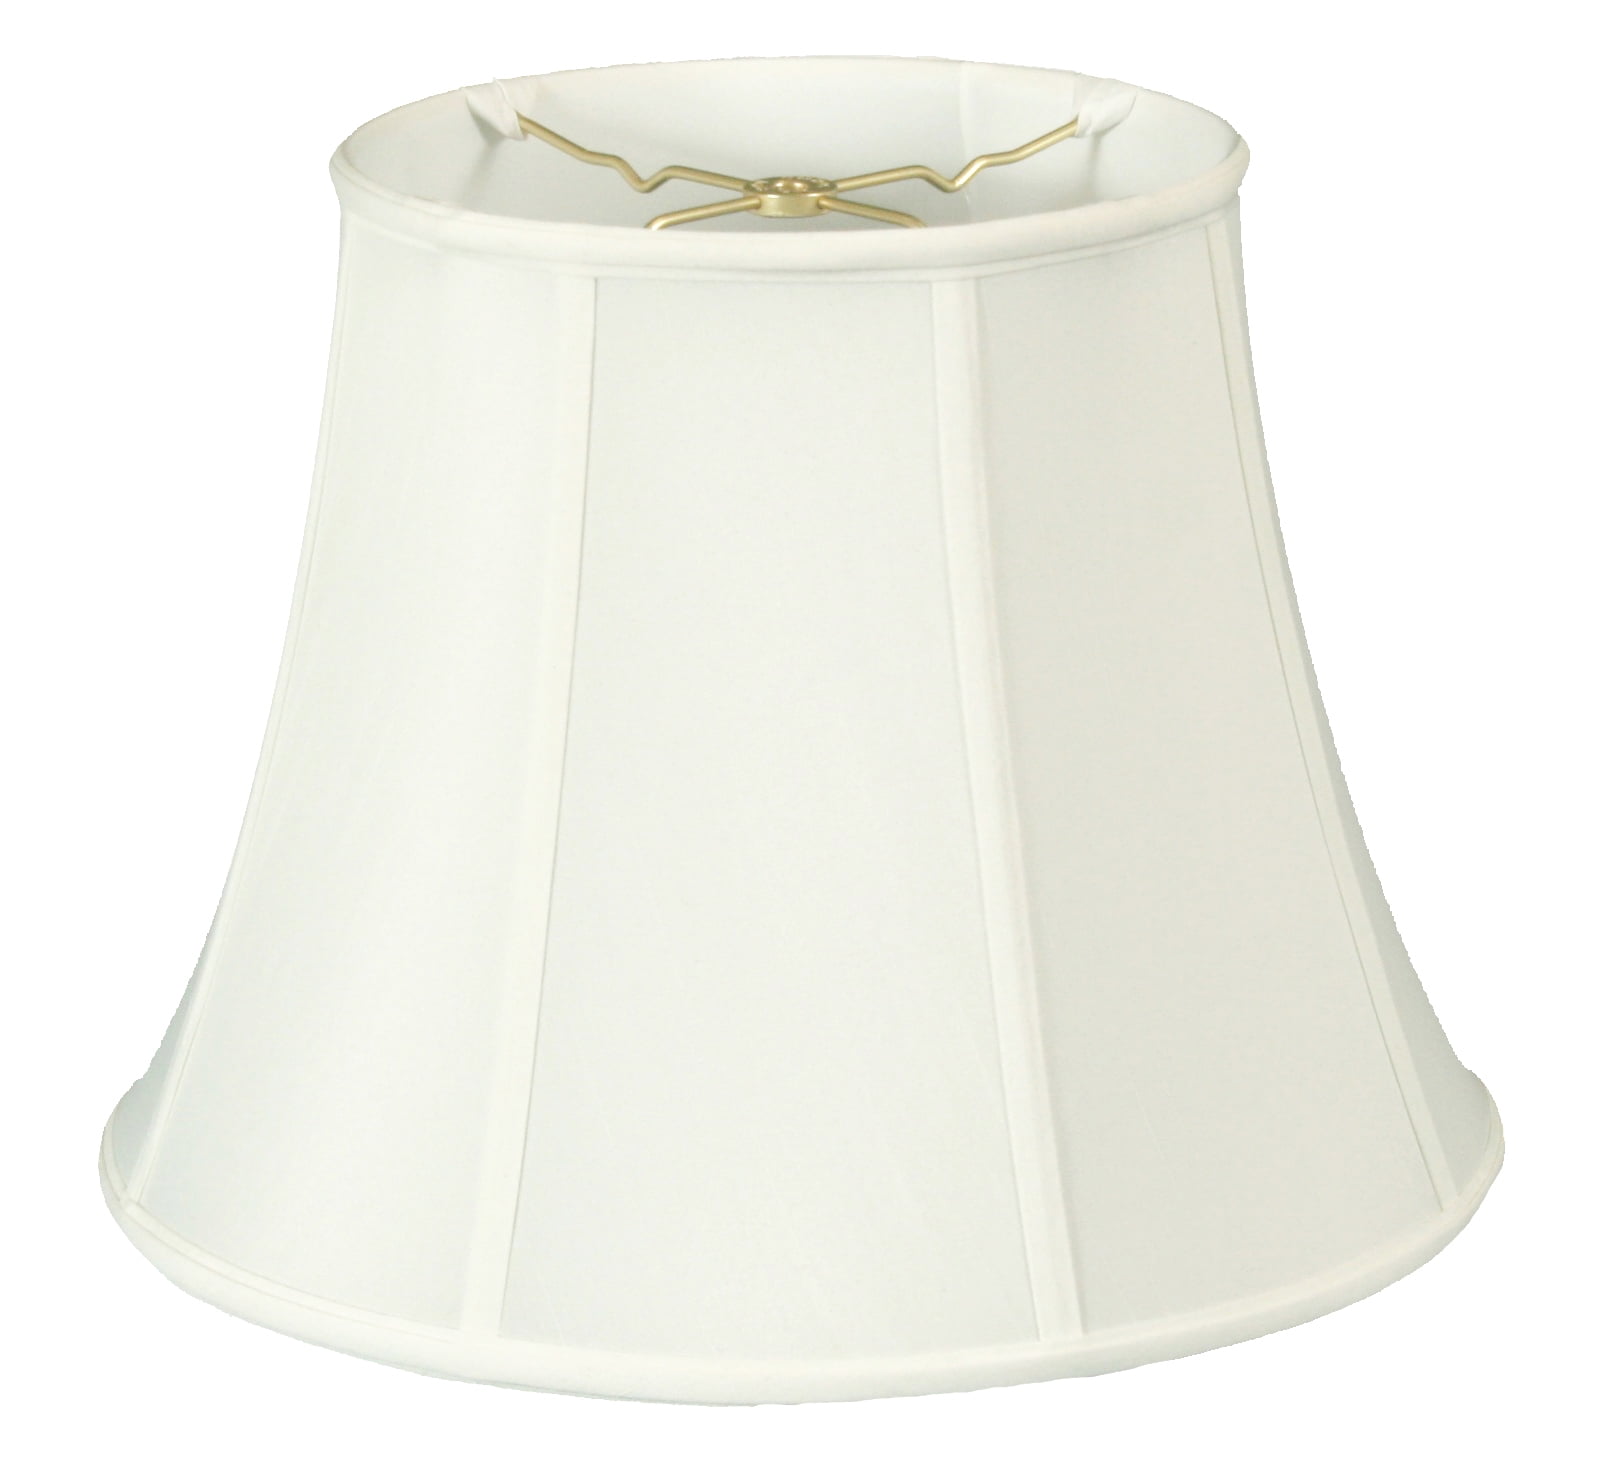 16" White Rayon Empire Hand Side Pleat Shade. 